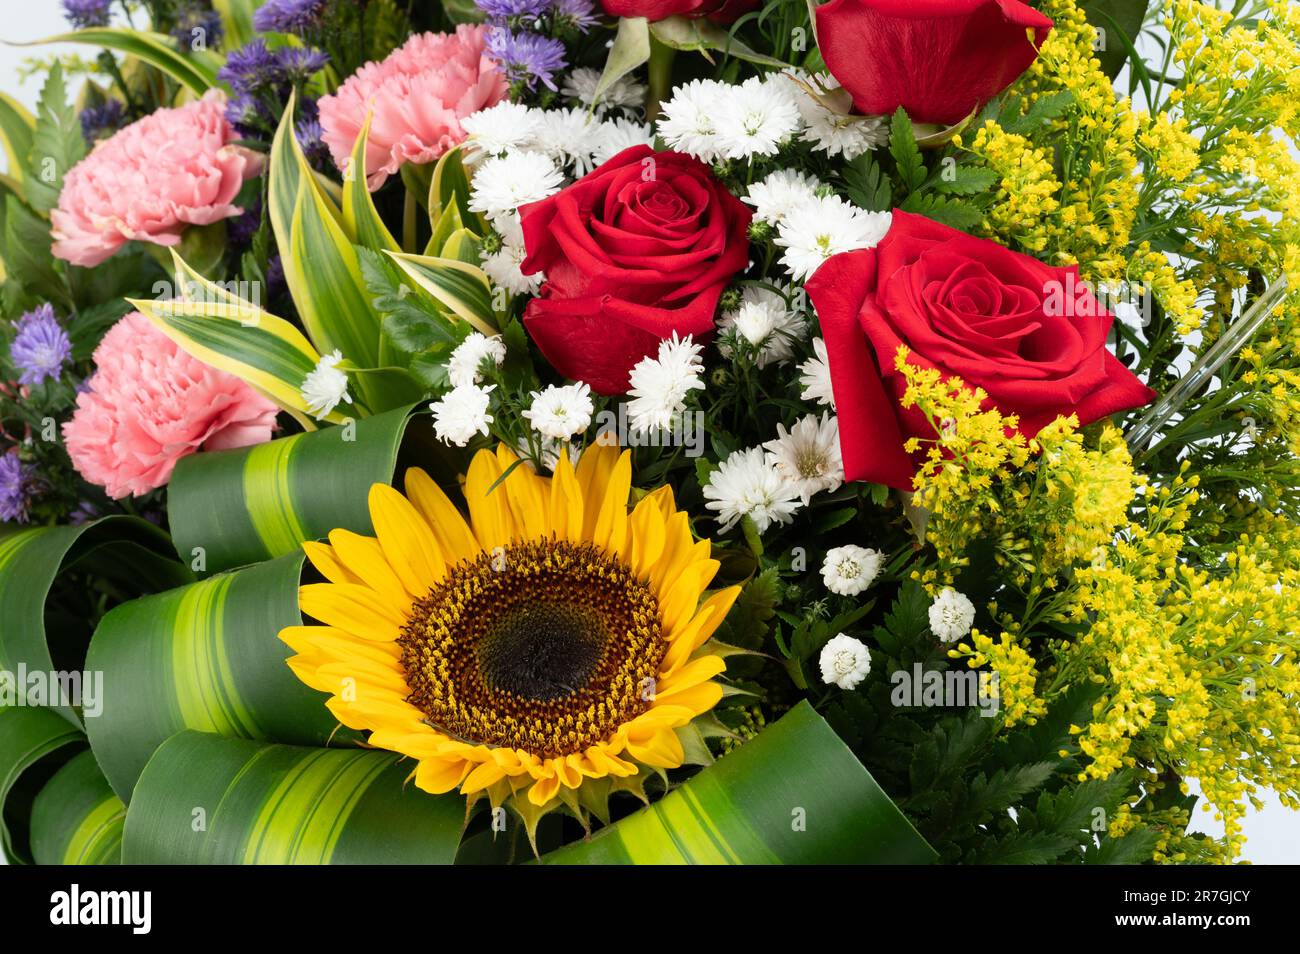 Colorful flower bouquet  with roses and sunflower on green leaf background Stock Photo